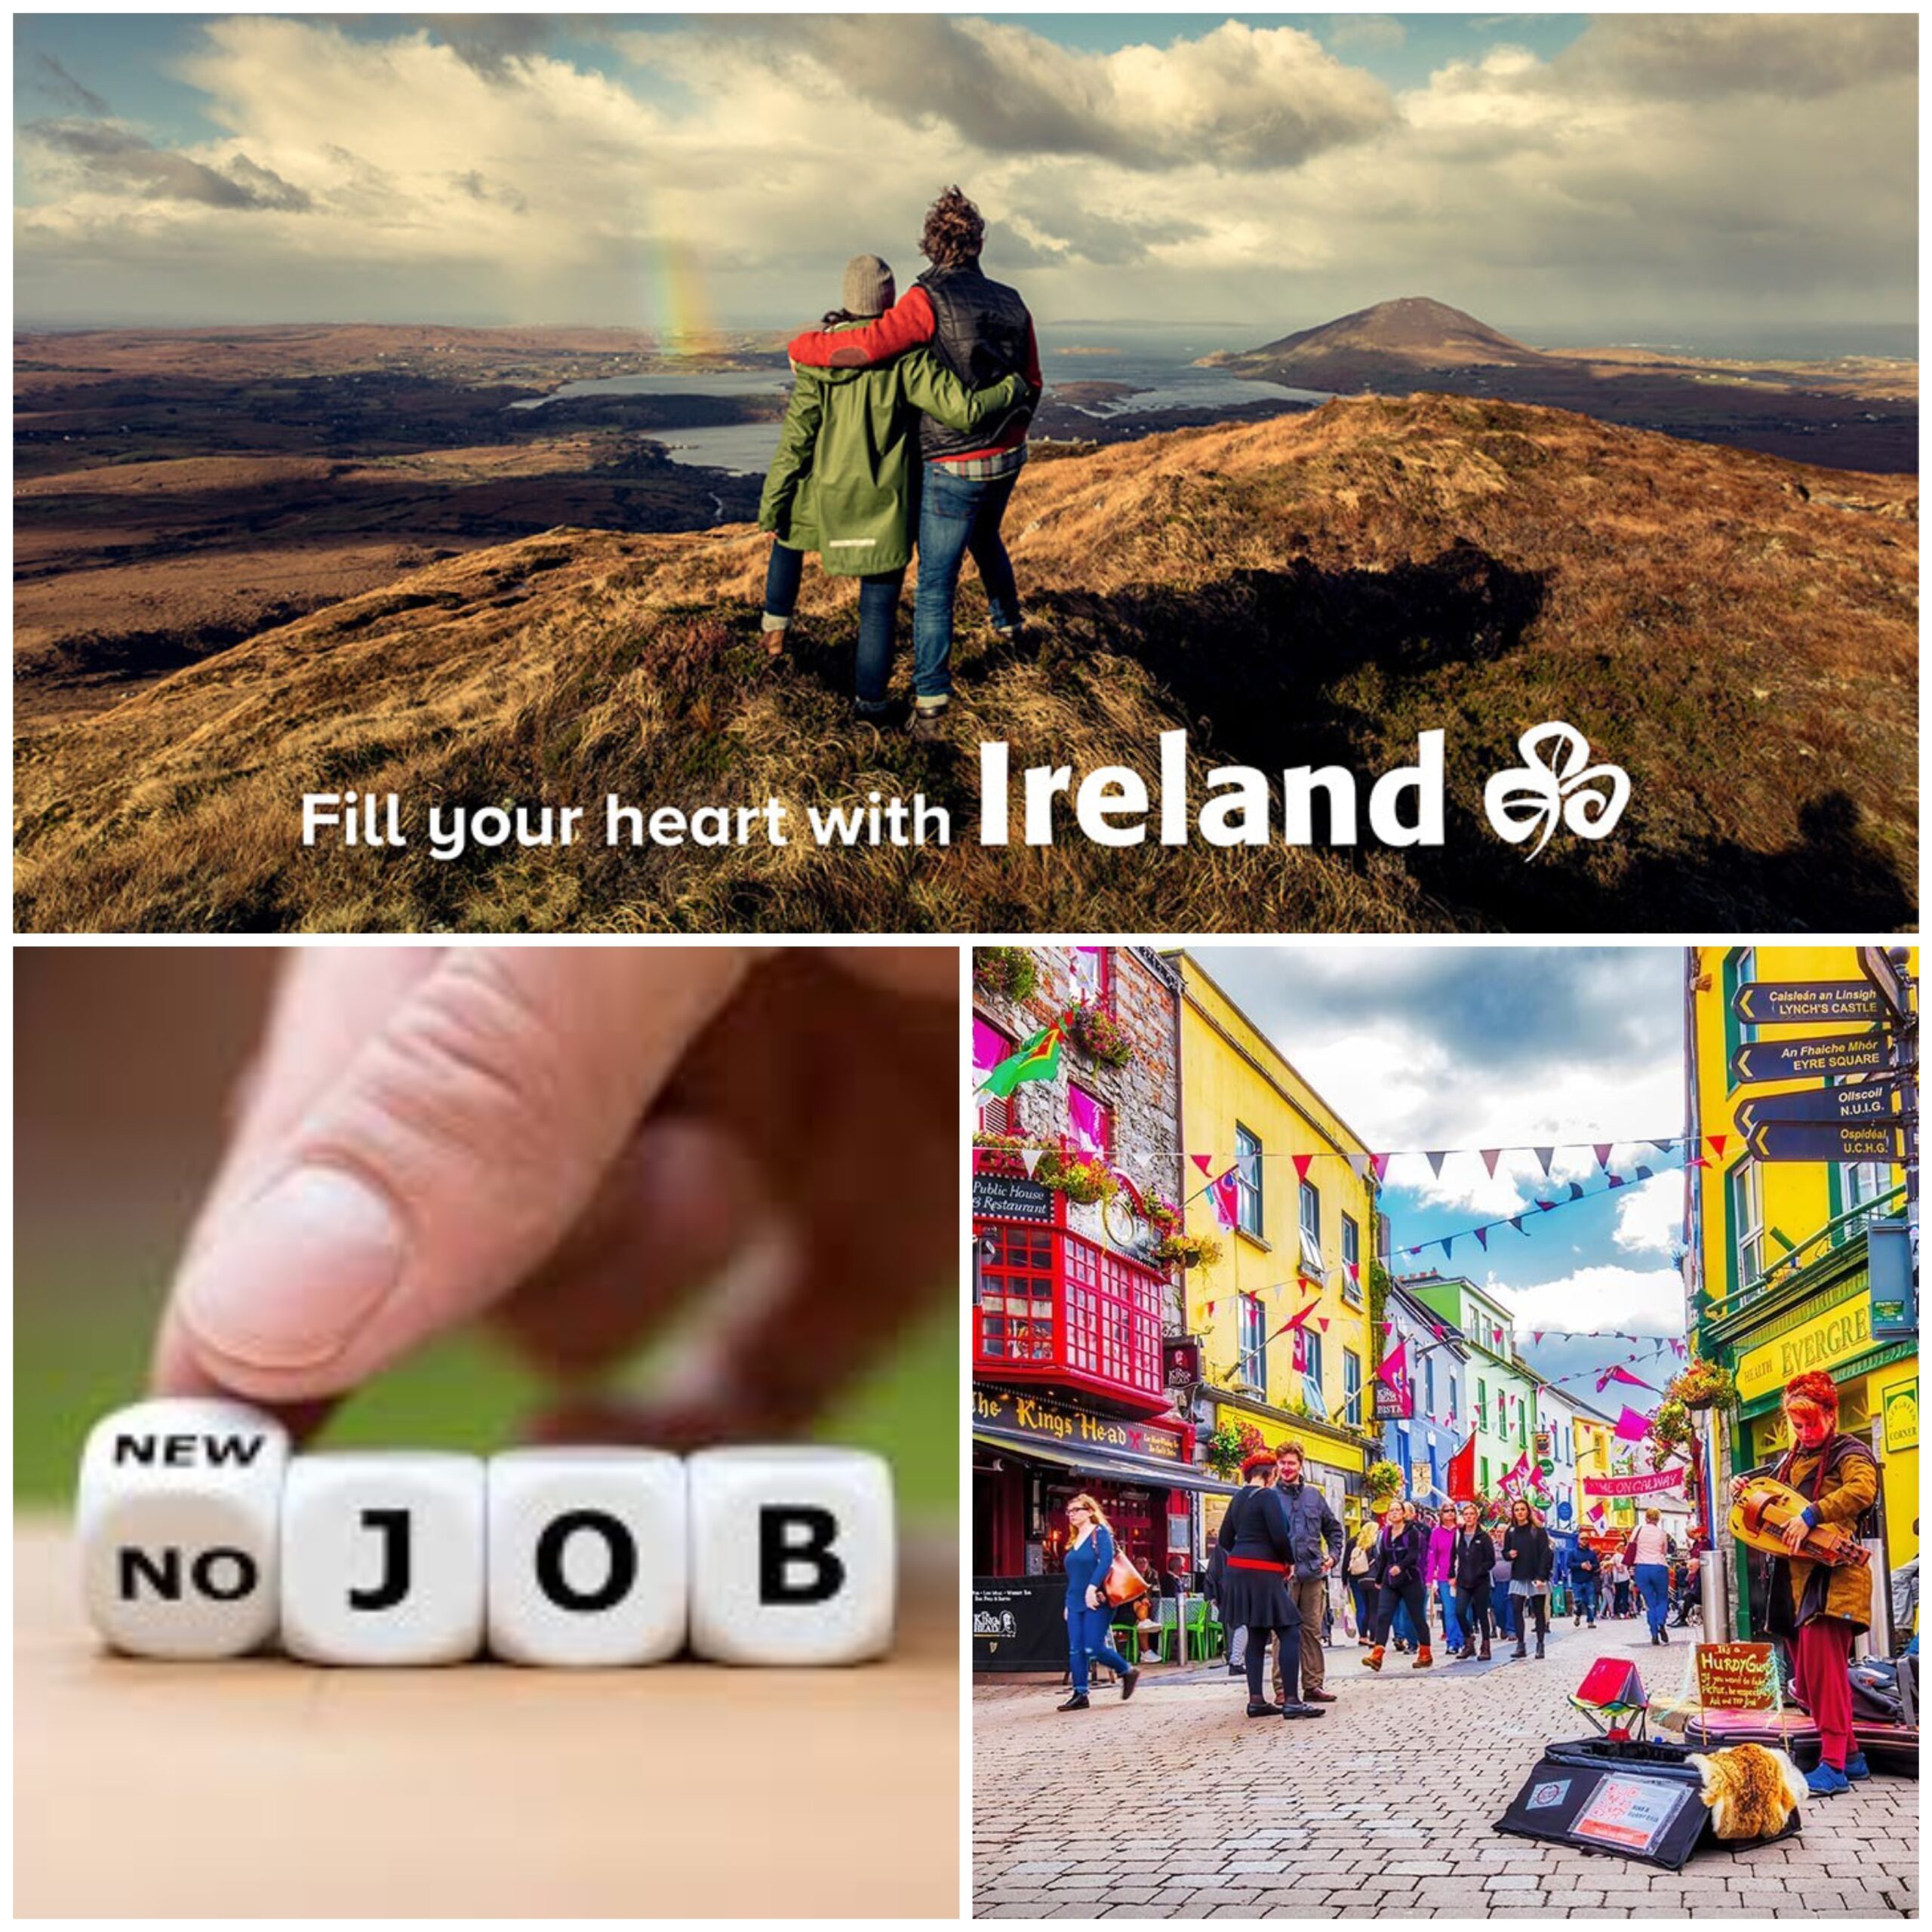 Ireland without job offer